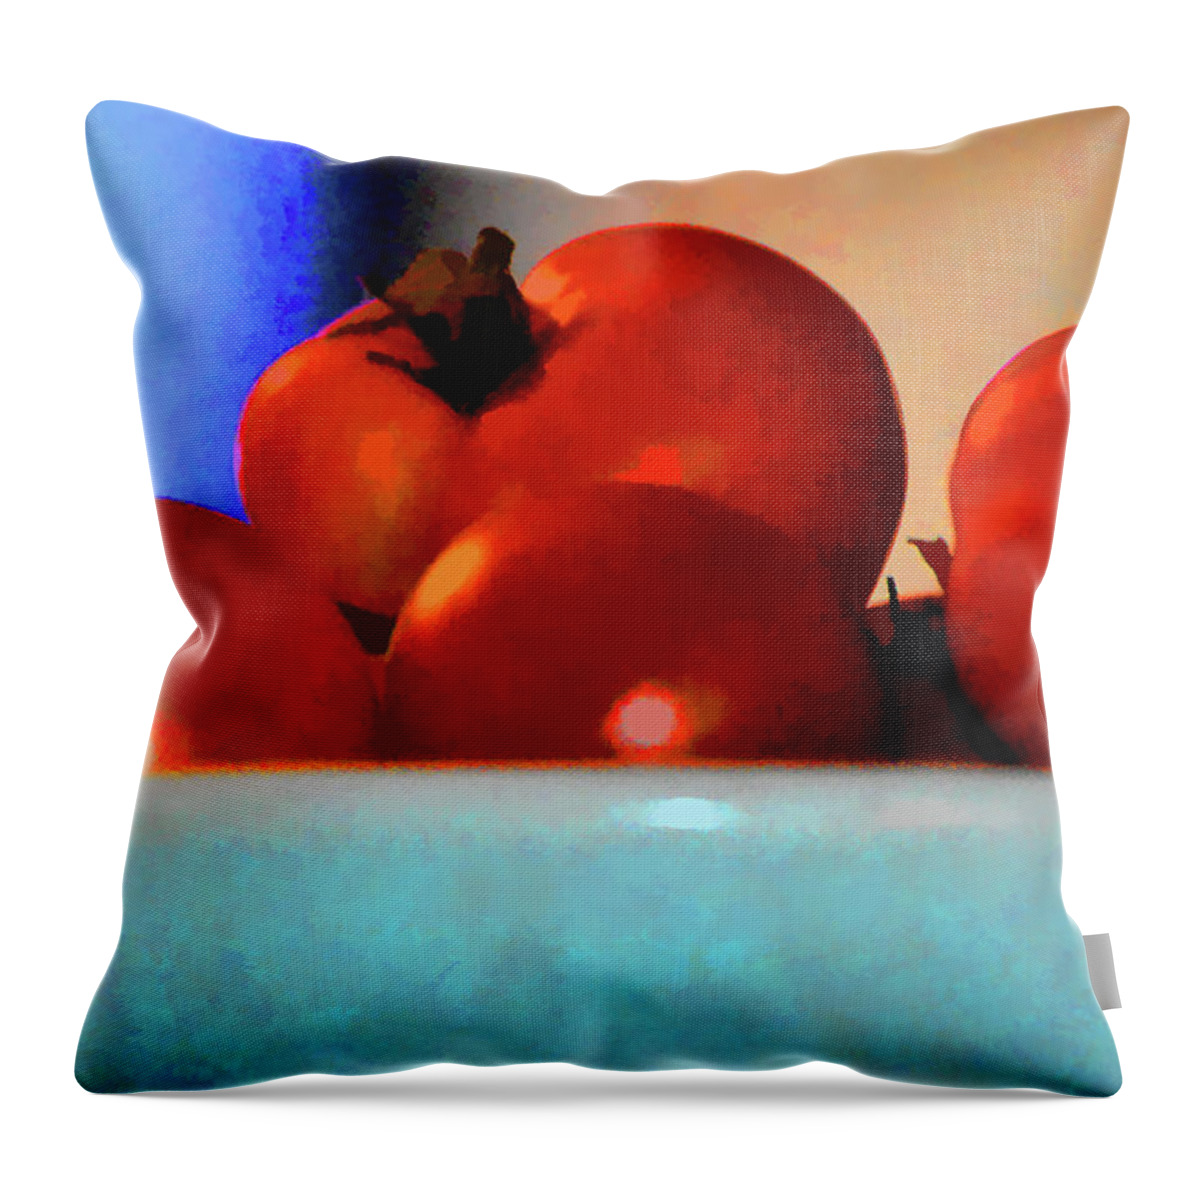 Tomato Throw Pillow featuring the photograph Food Vine Ripe And Ready Tomato Art by Lesa Fine